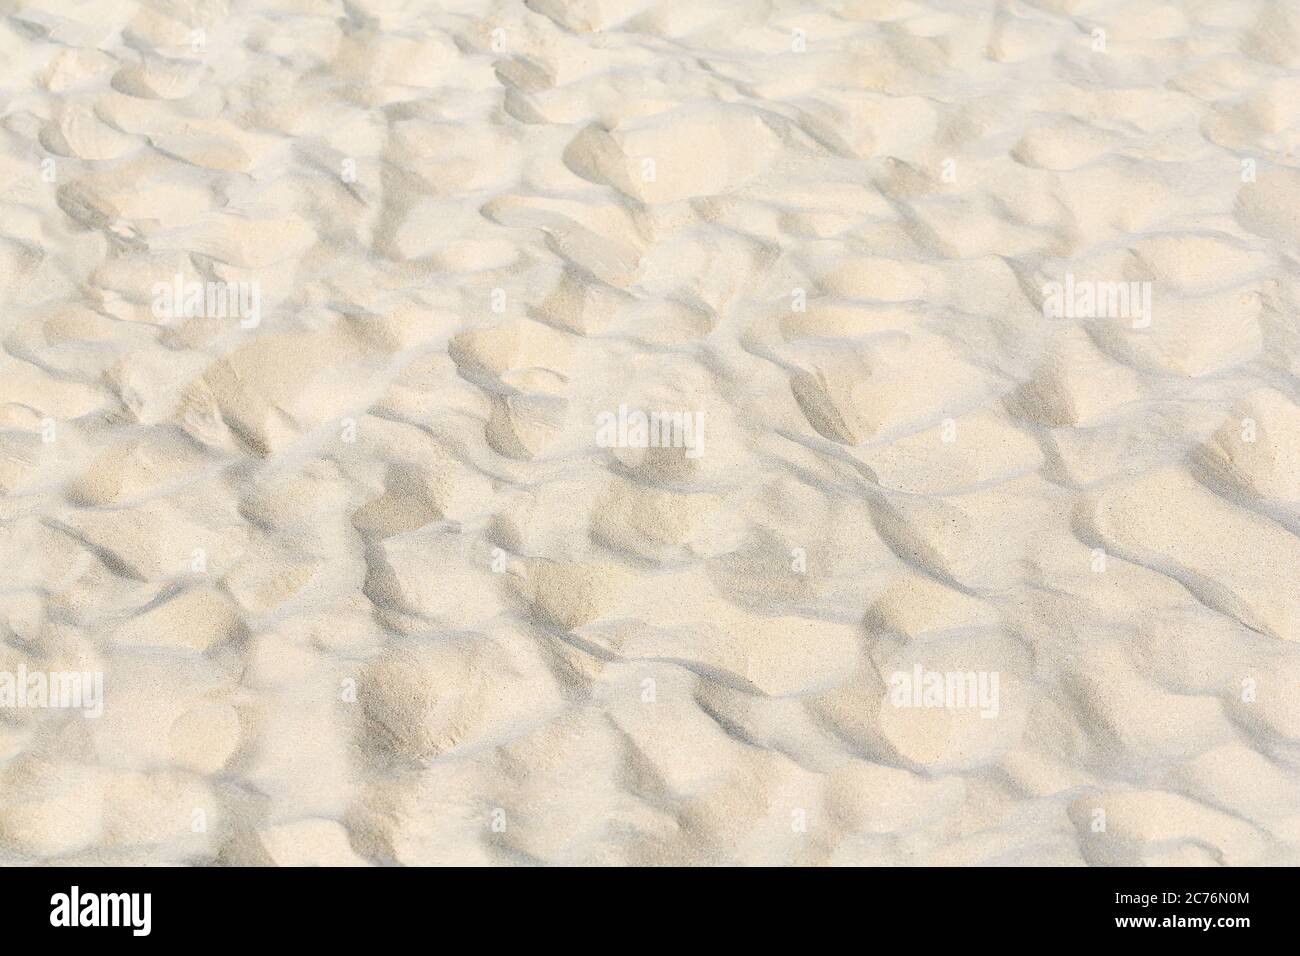 Lines in the sand of beach, close up Stock Photo